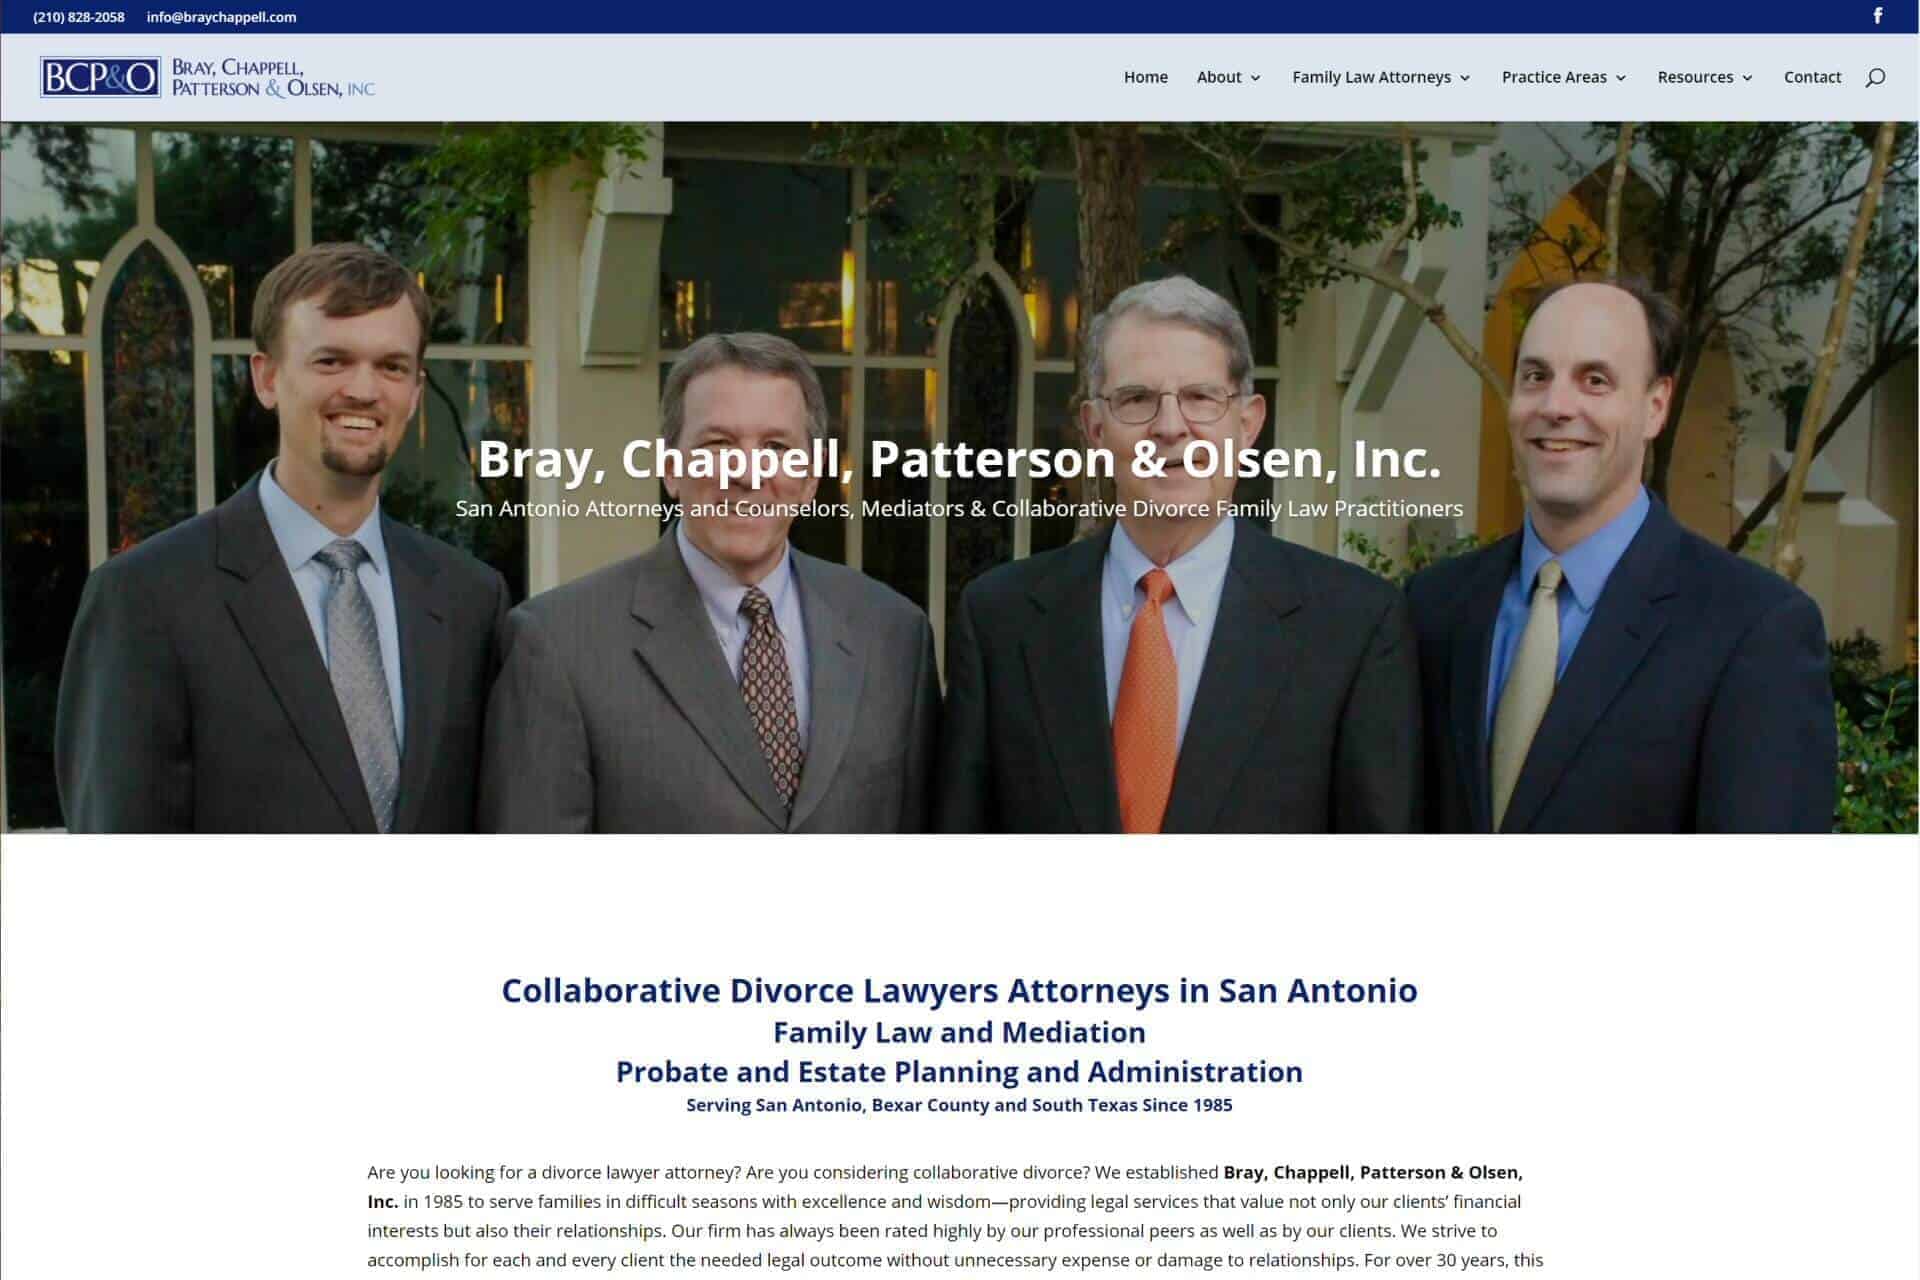 Bray, Chappell, Patterson & Olsen, Inc. by Alford Benefits